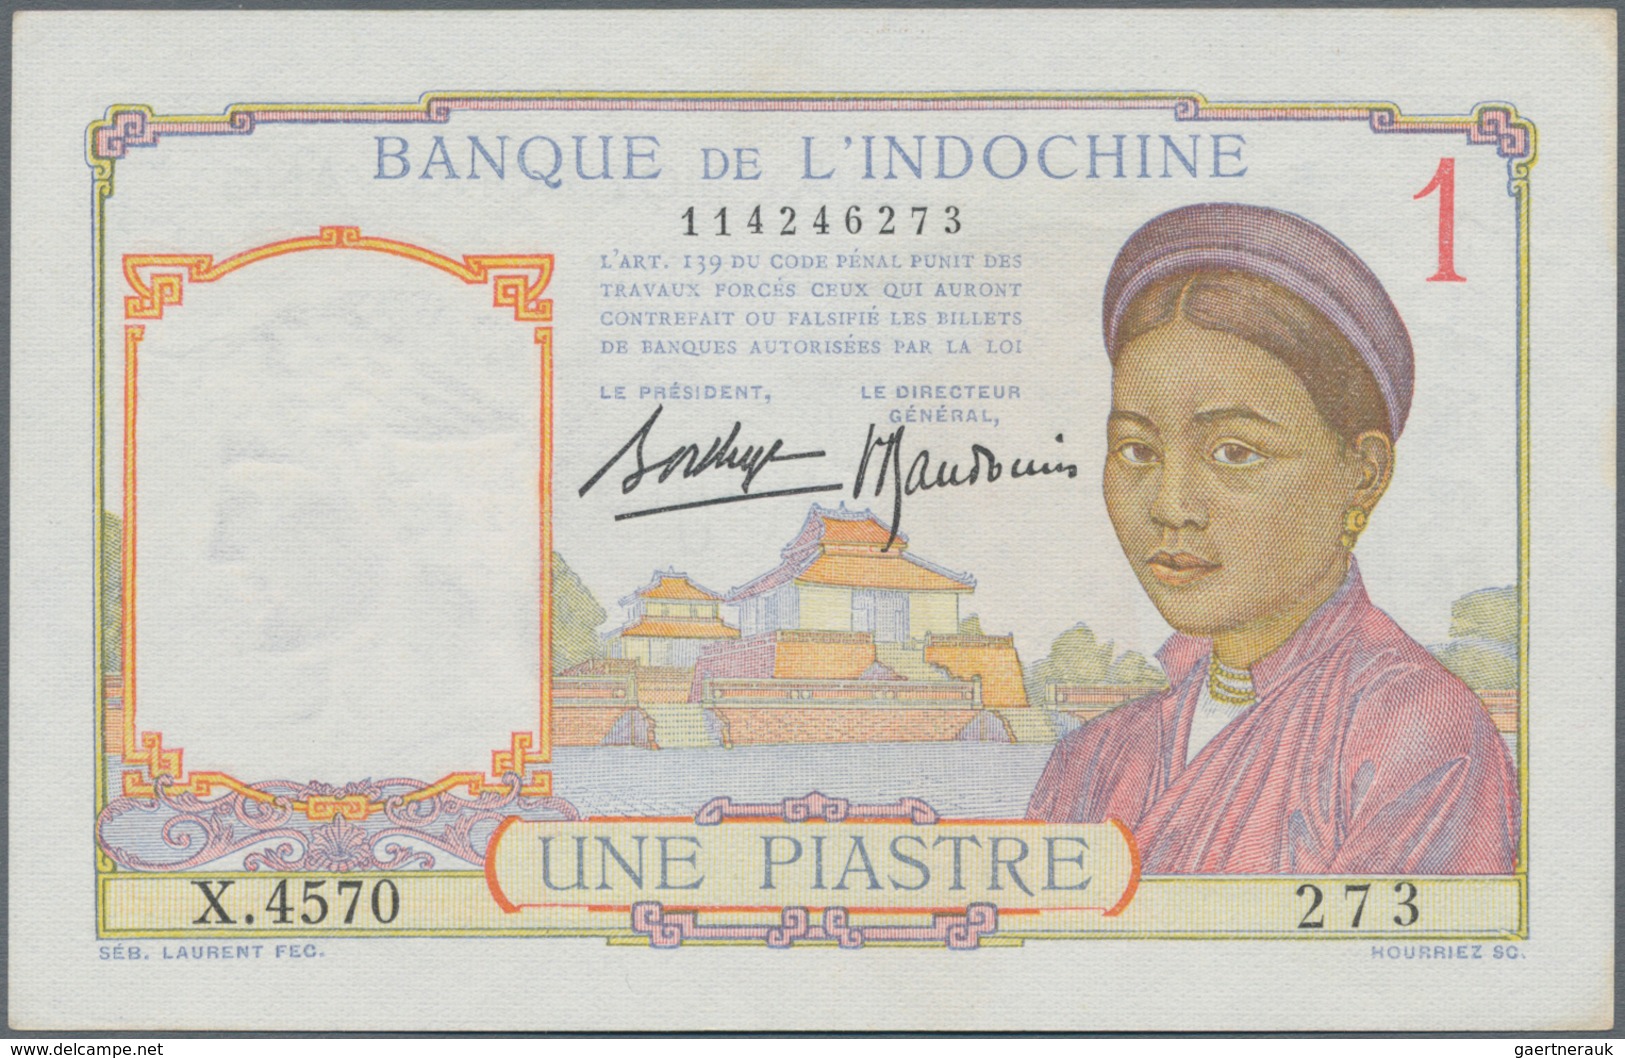 French Indochina / Französisch Indochina: Banque de l'Indo-Chine very nice set with 10 banknotes of